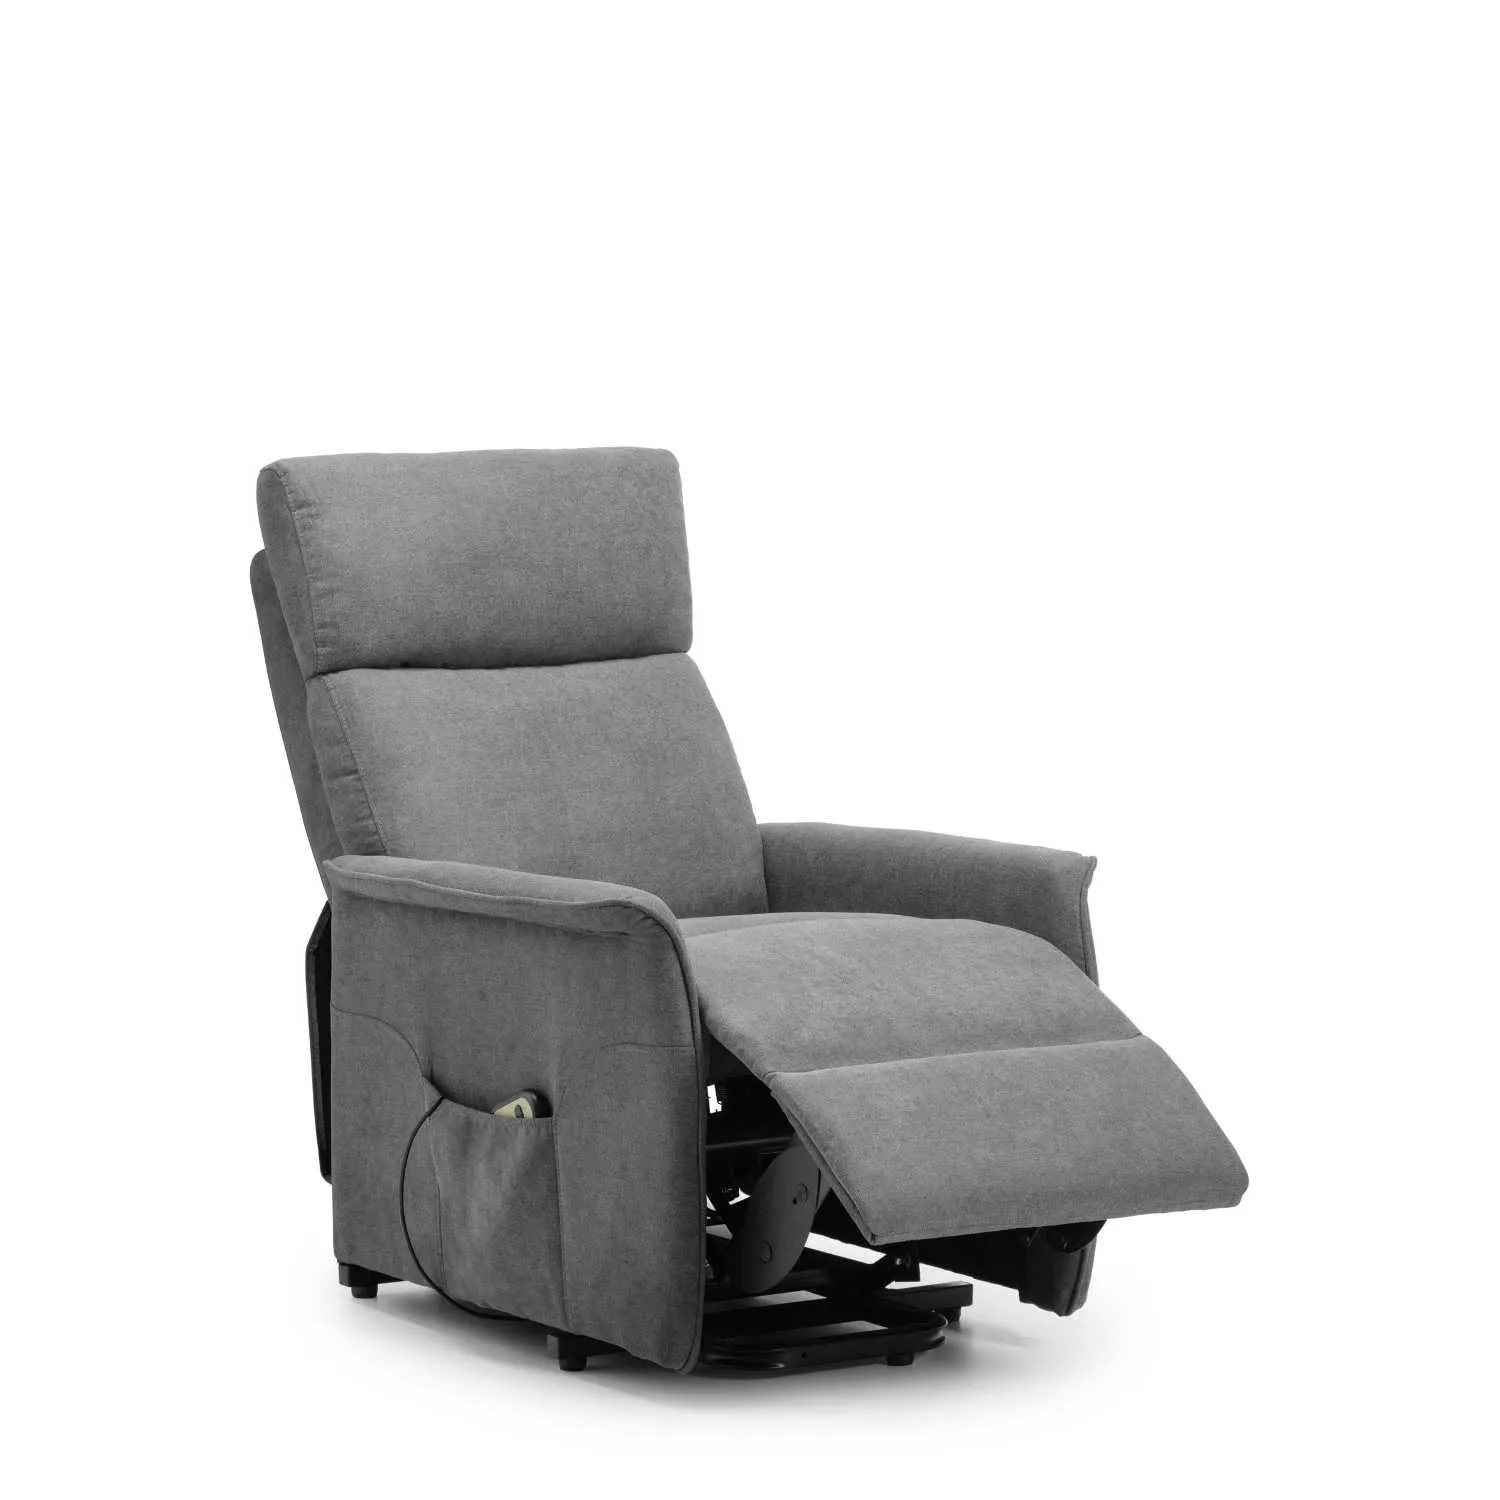 Helena Rise And Recline Chair Charcoal Fabric